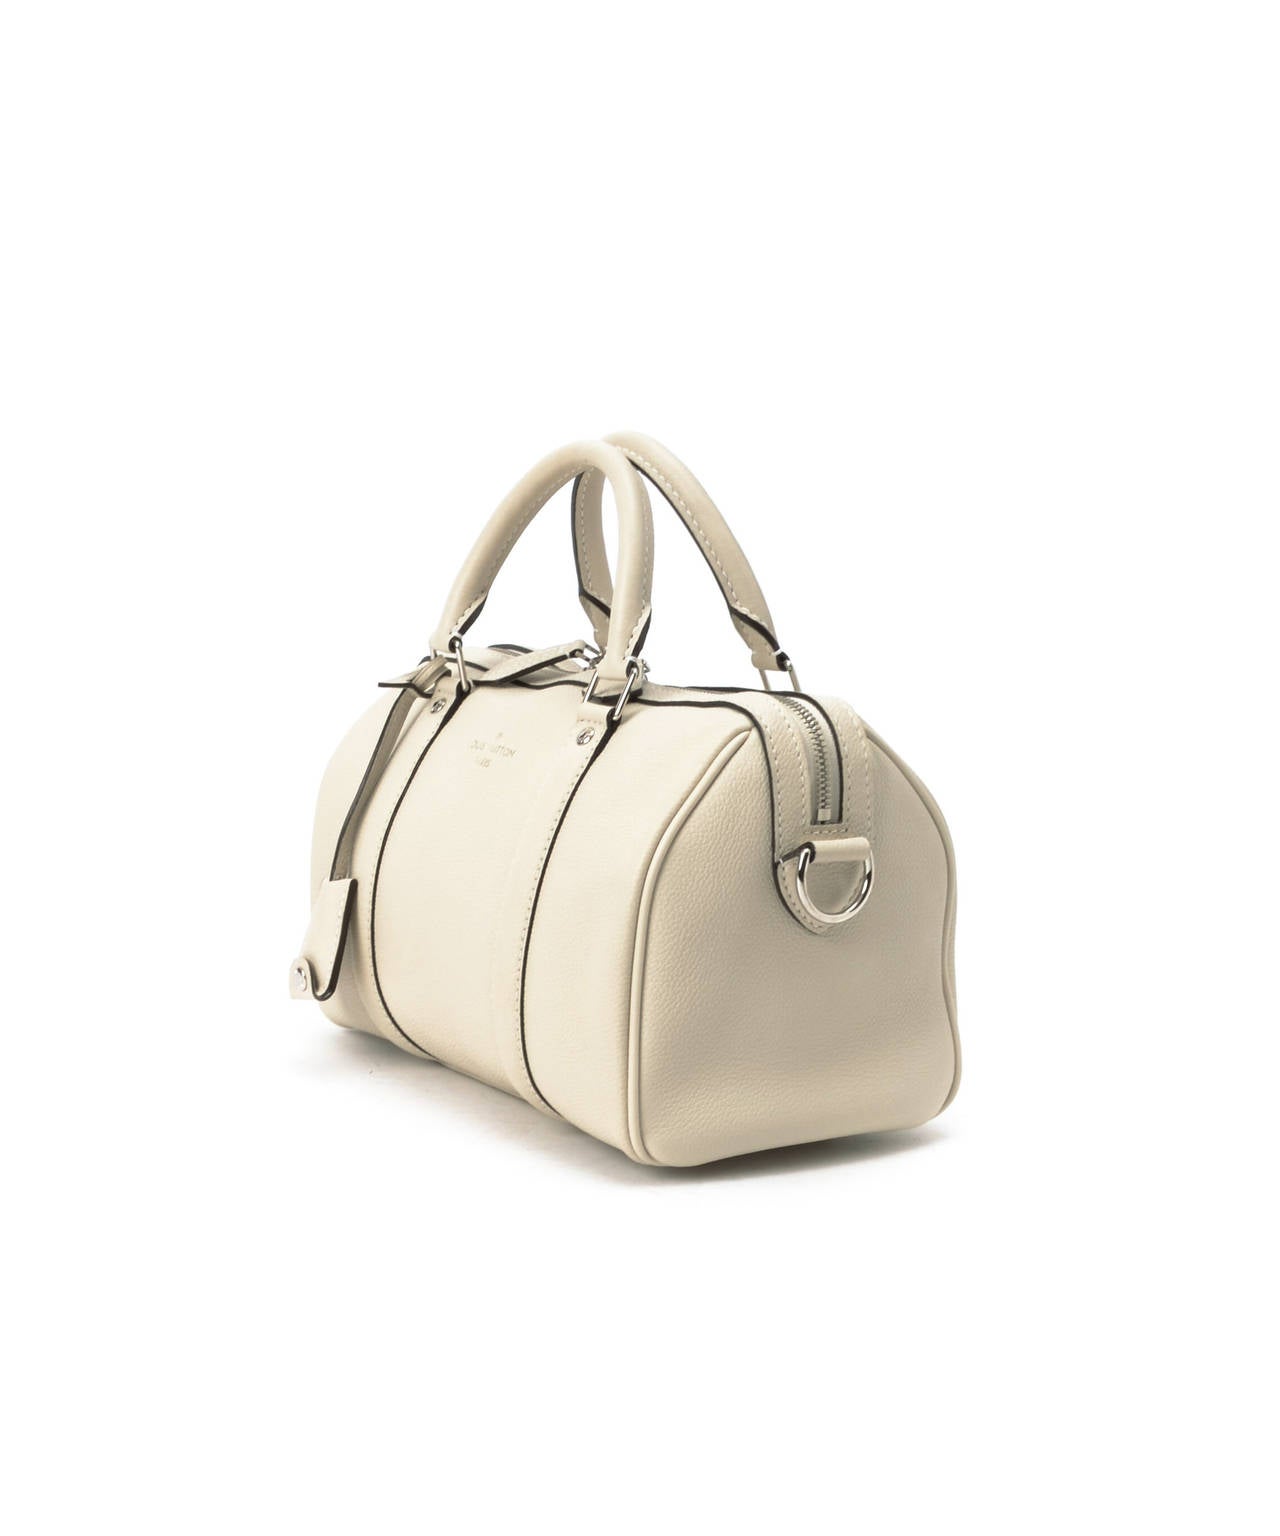 White Veau Cachemire leather 
Due to its vintage nature, there are faint stains on the corners The shoulder strap's drop length is approximately 47 cm 
Comes with original lock, keys, clochette, dust bag and strap 
The measurements of the items